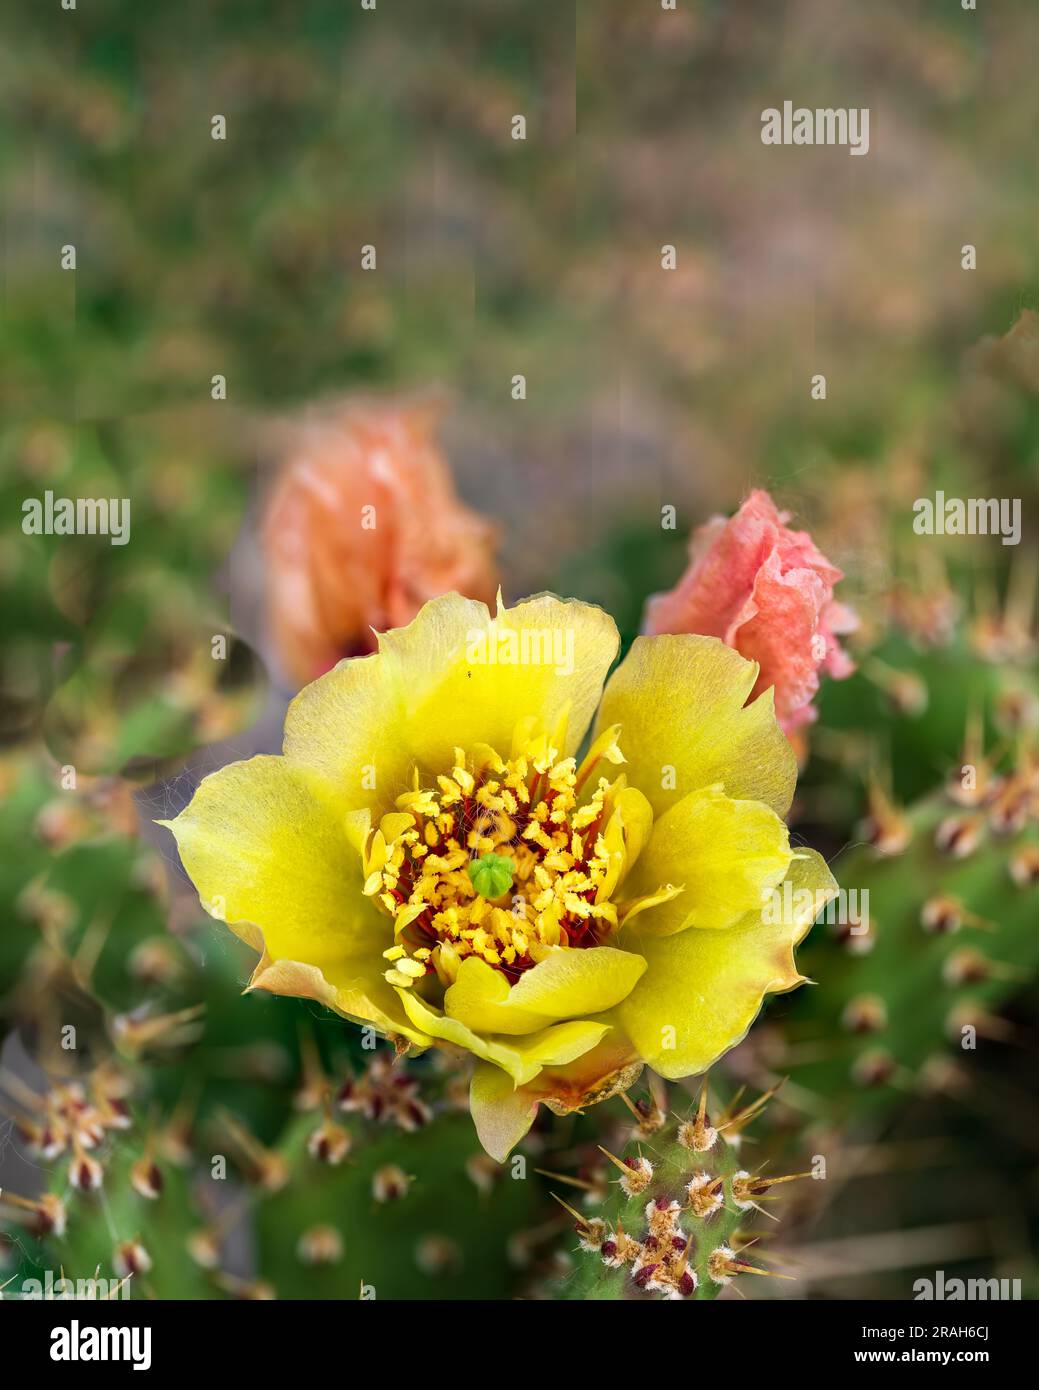 The small prickly pear cactus blooming on a plant found in Mt. Nebo, Manitoba, Canada. Stock Photo